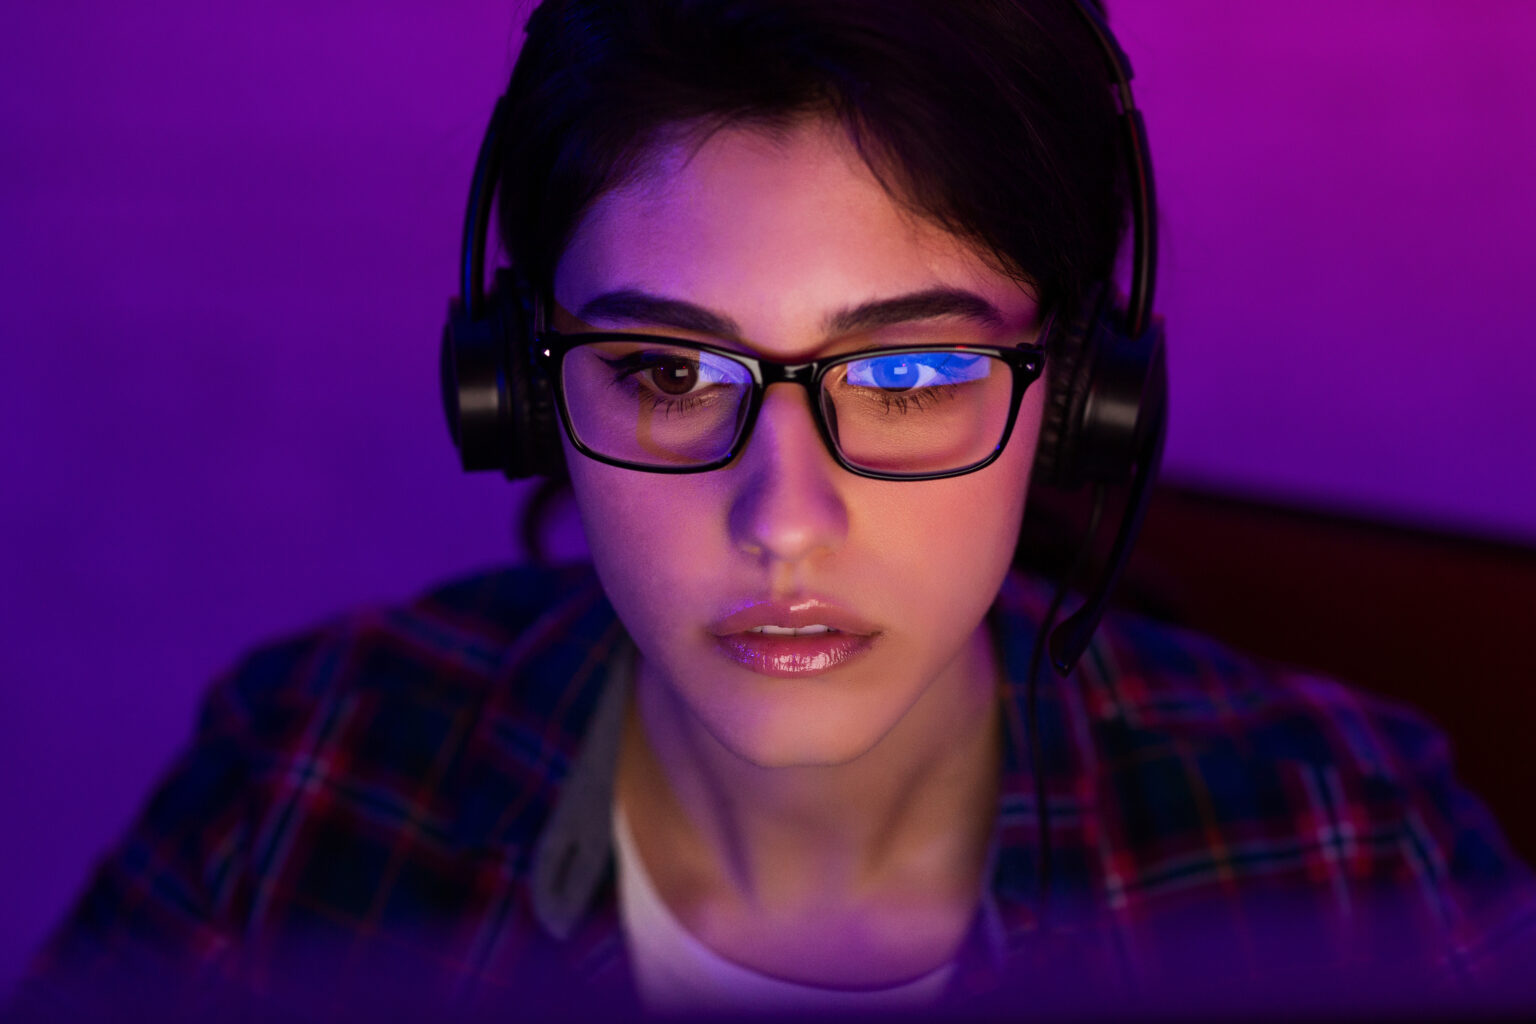 There is a female programmer working on laptop late at night. Room illuminated by neon light purple, great face illustrating Information Security topic and the CICO job title